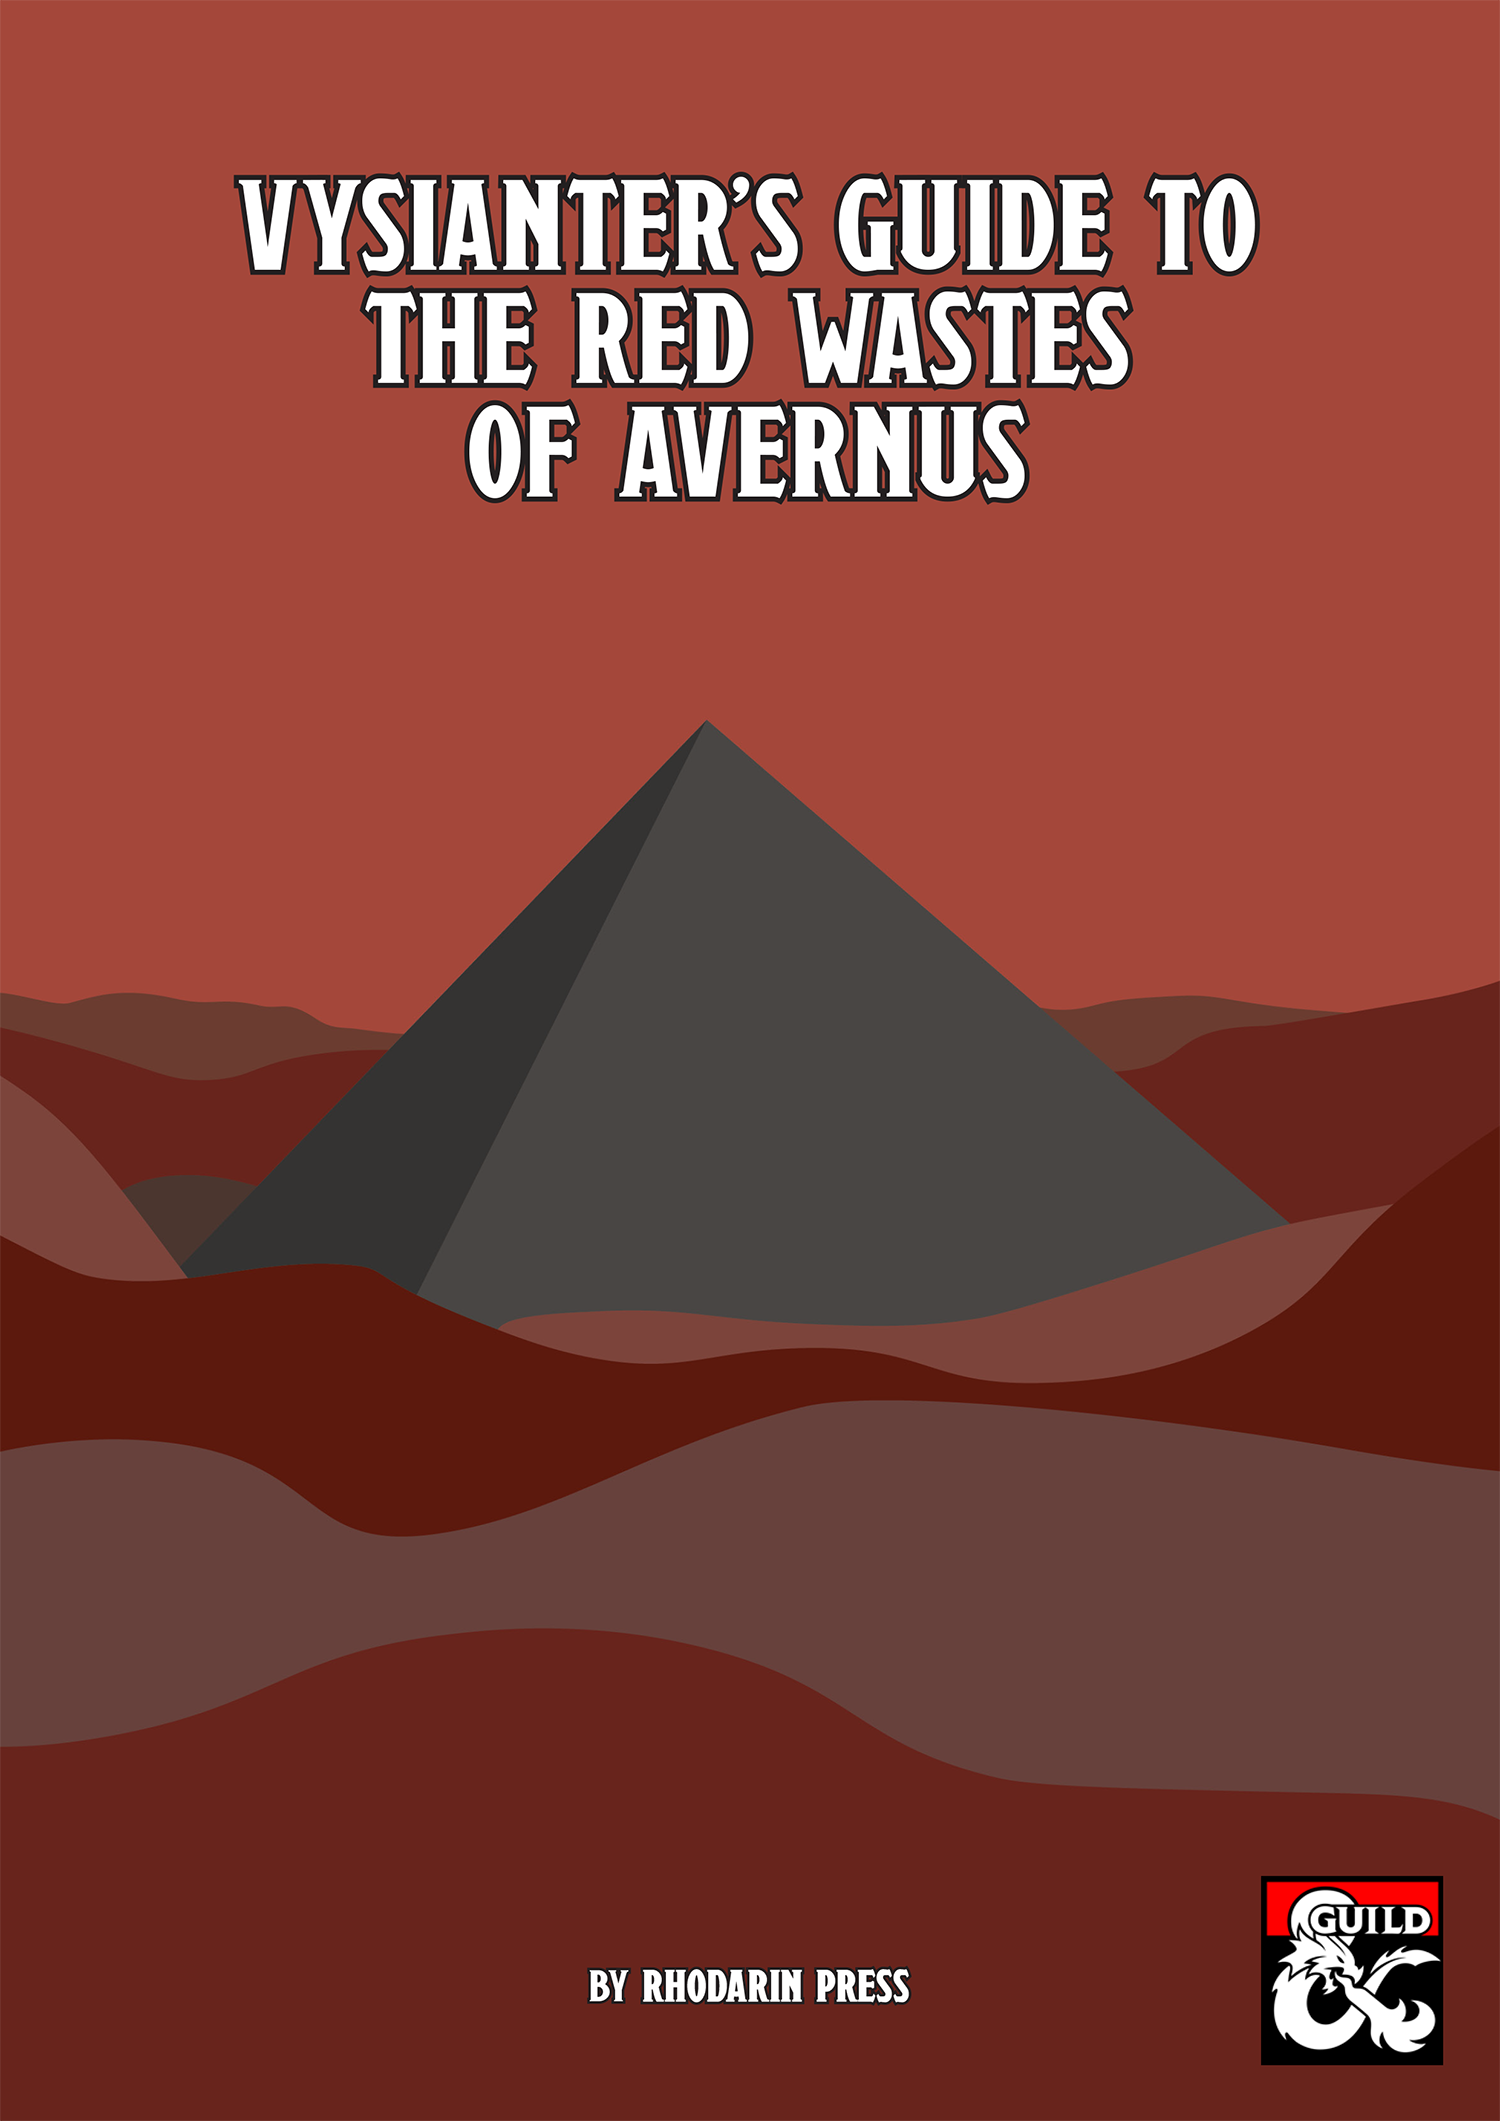 Vysianter's Guide to the Red Wastes of Avernus - Rhodarin Press